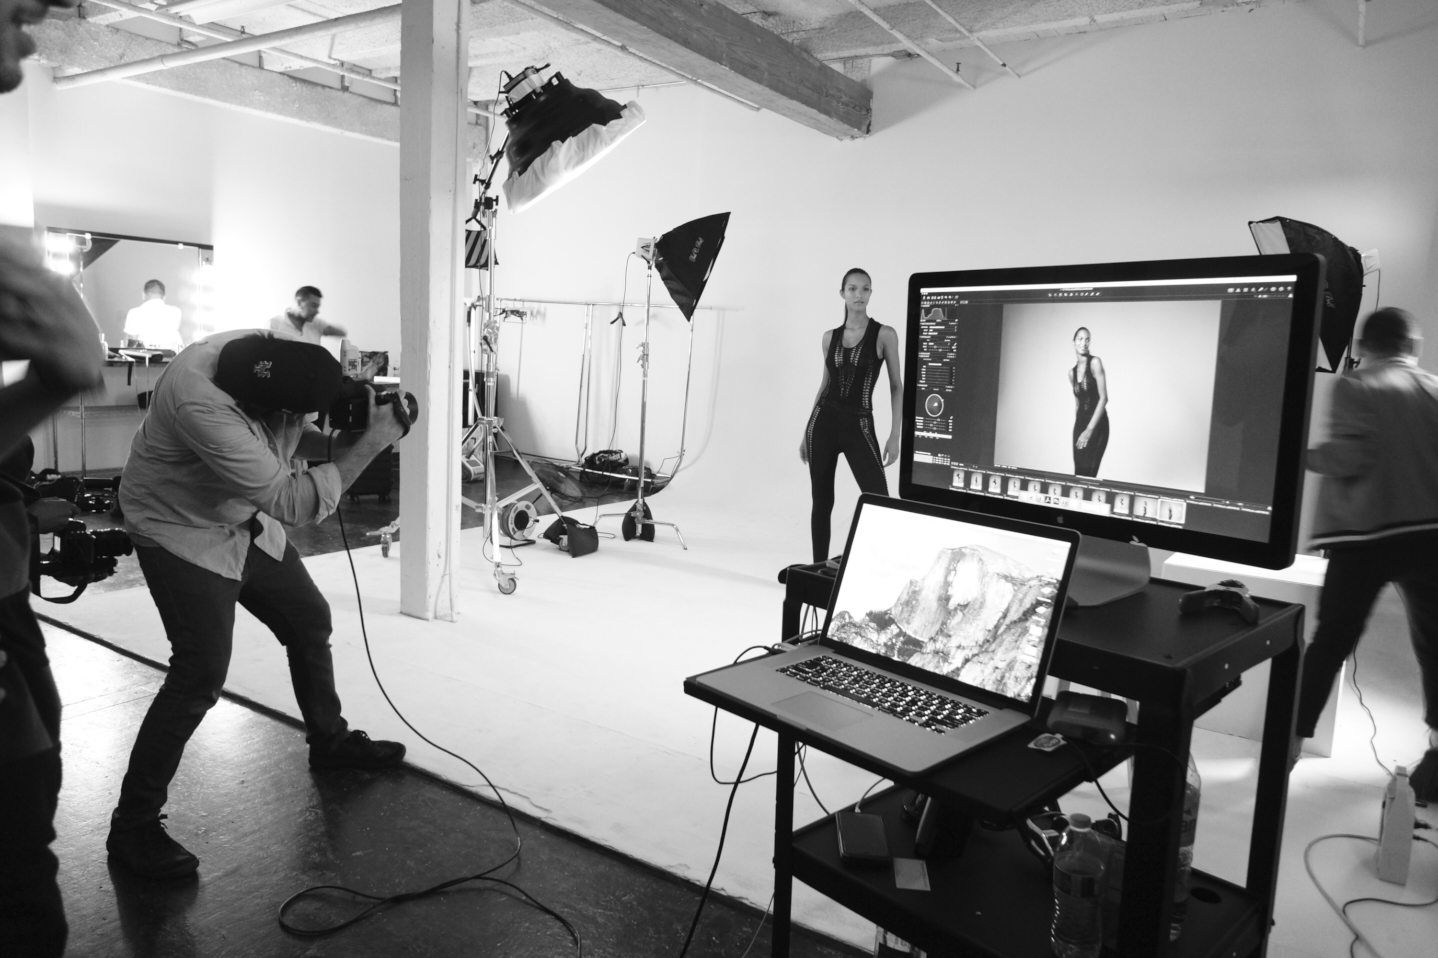 Behind the scenes with New York Fashion Photographer